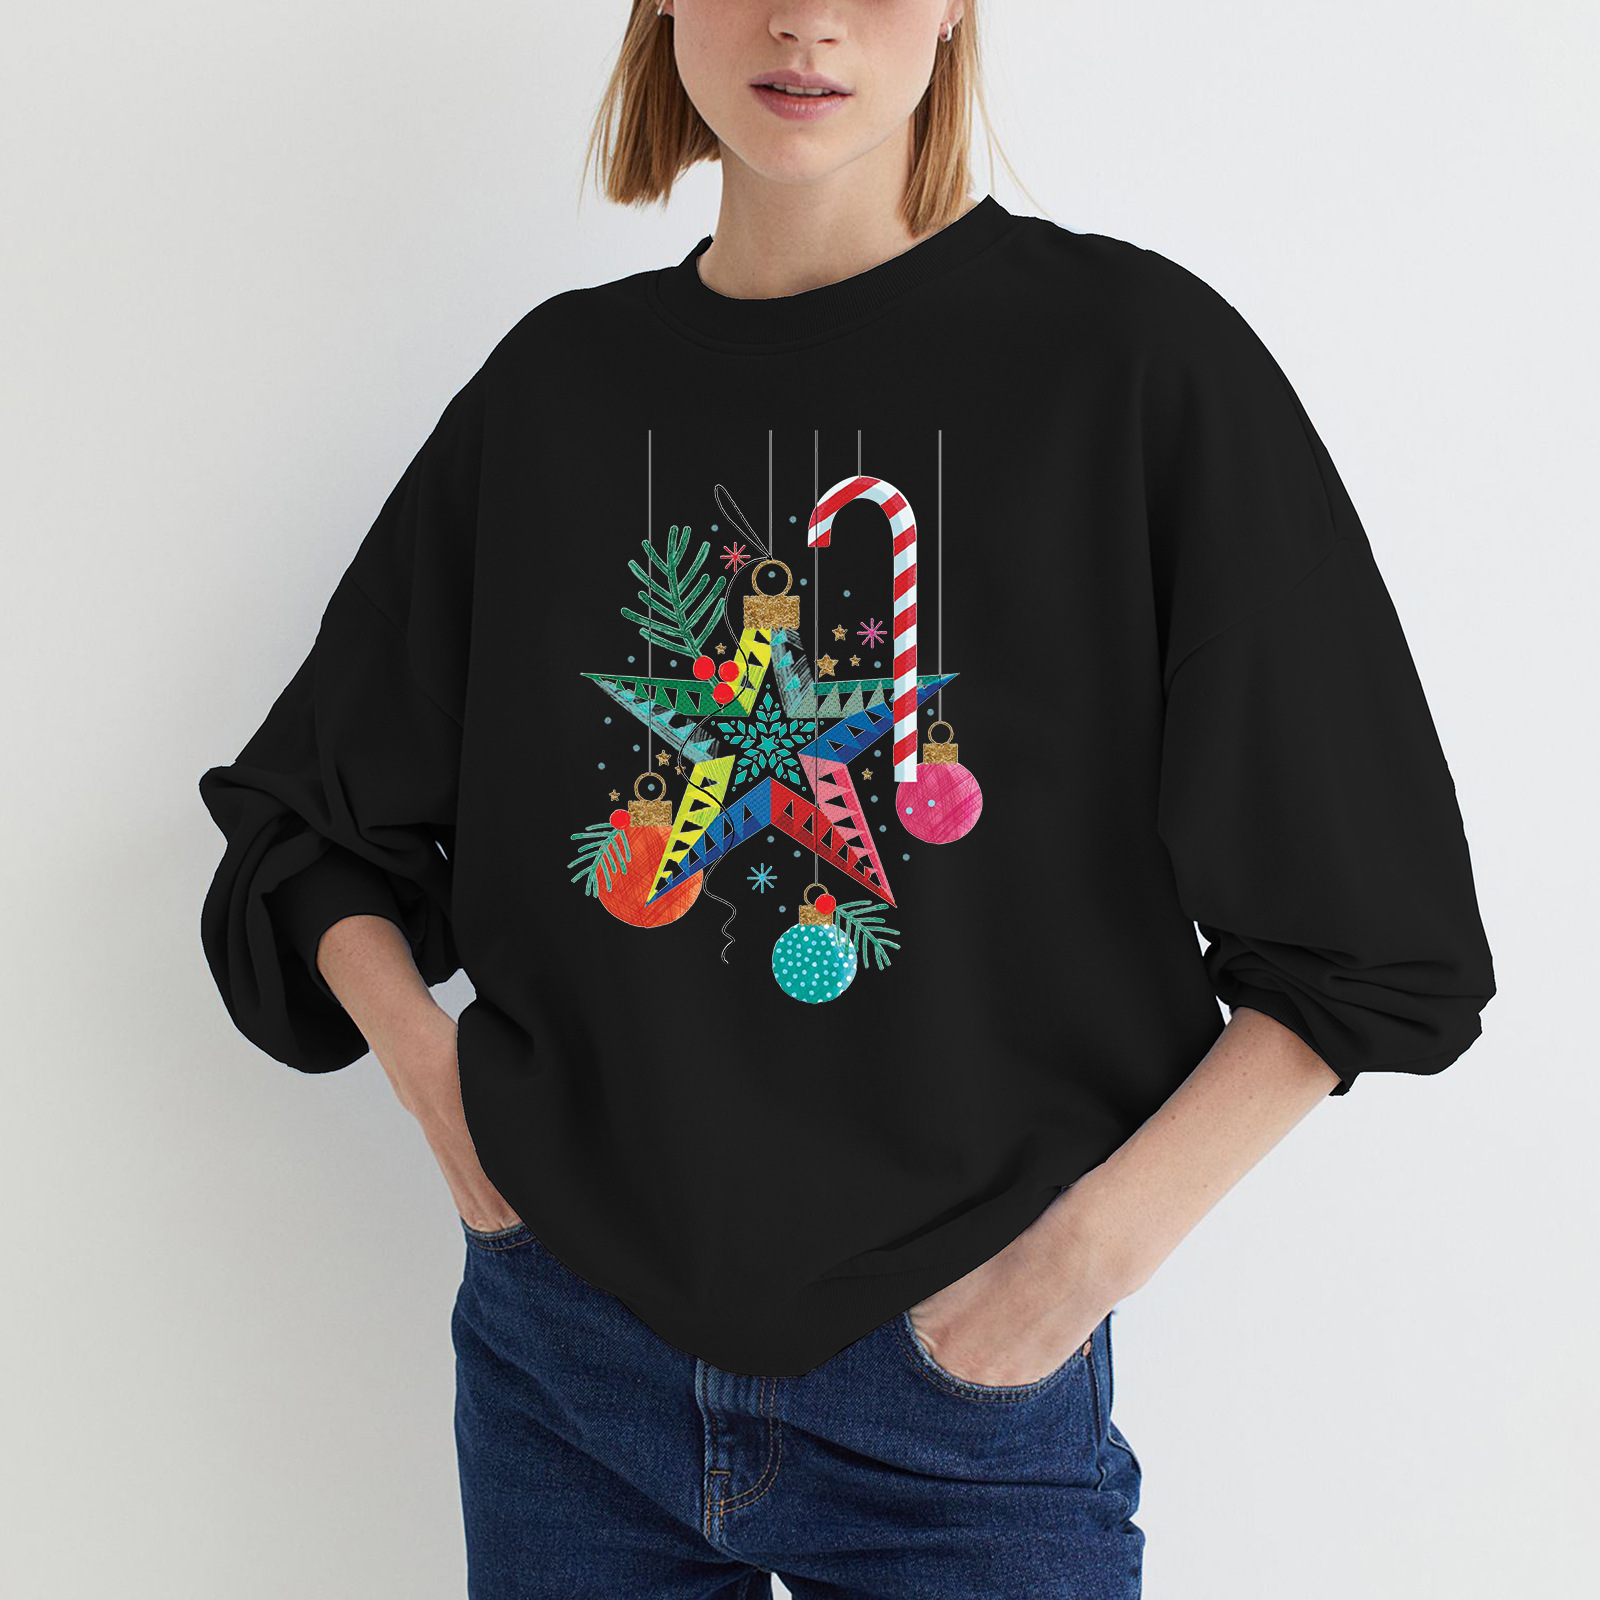 A floral print round neck hoodie for Christmas